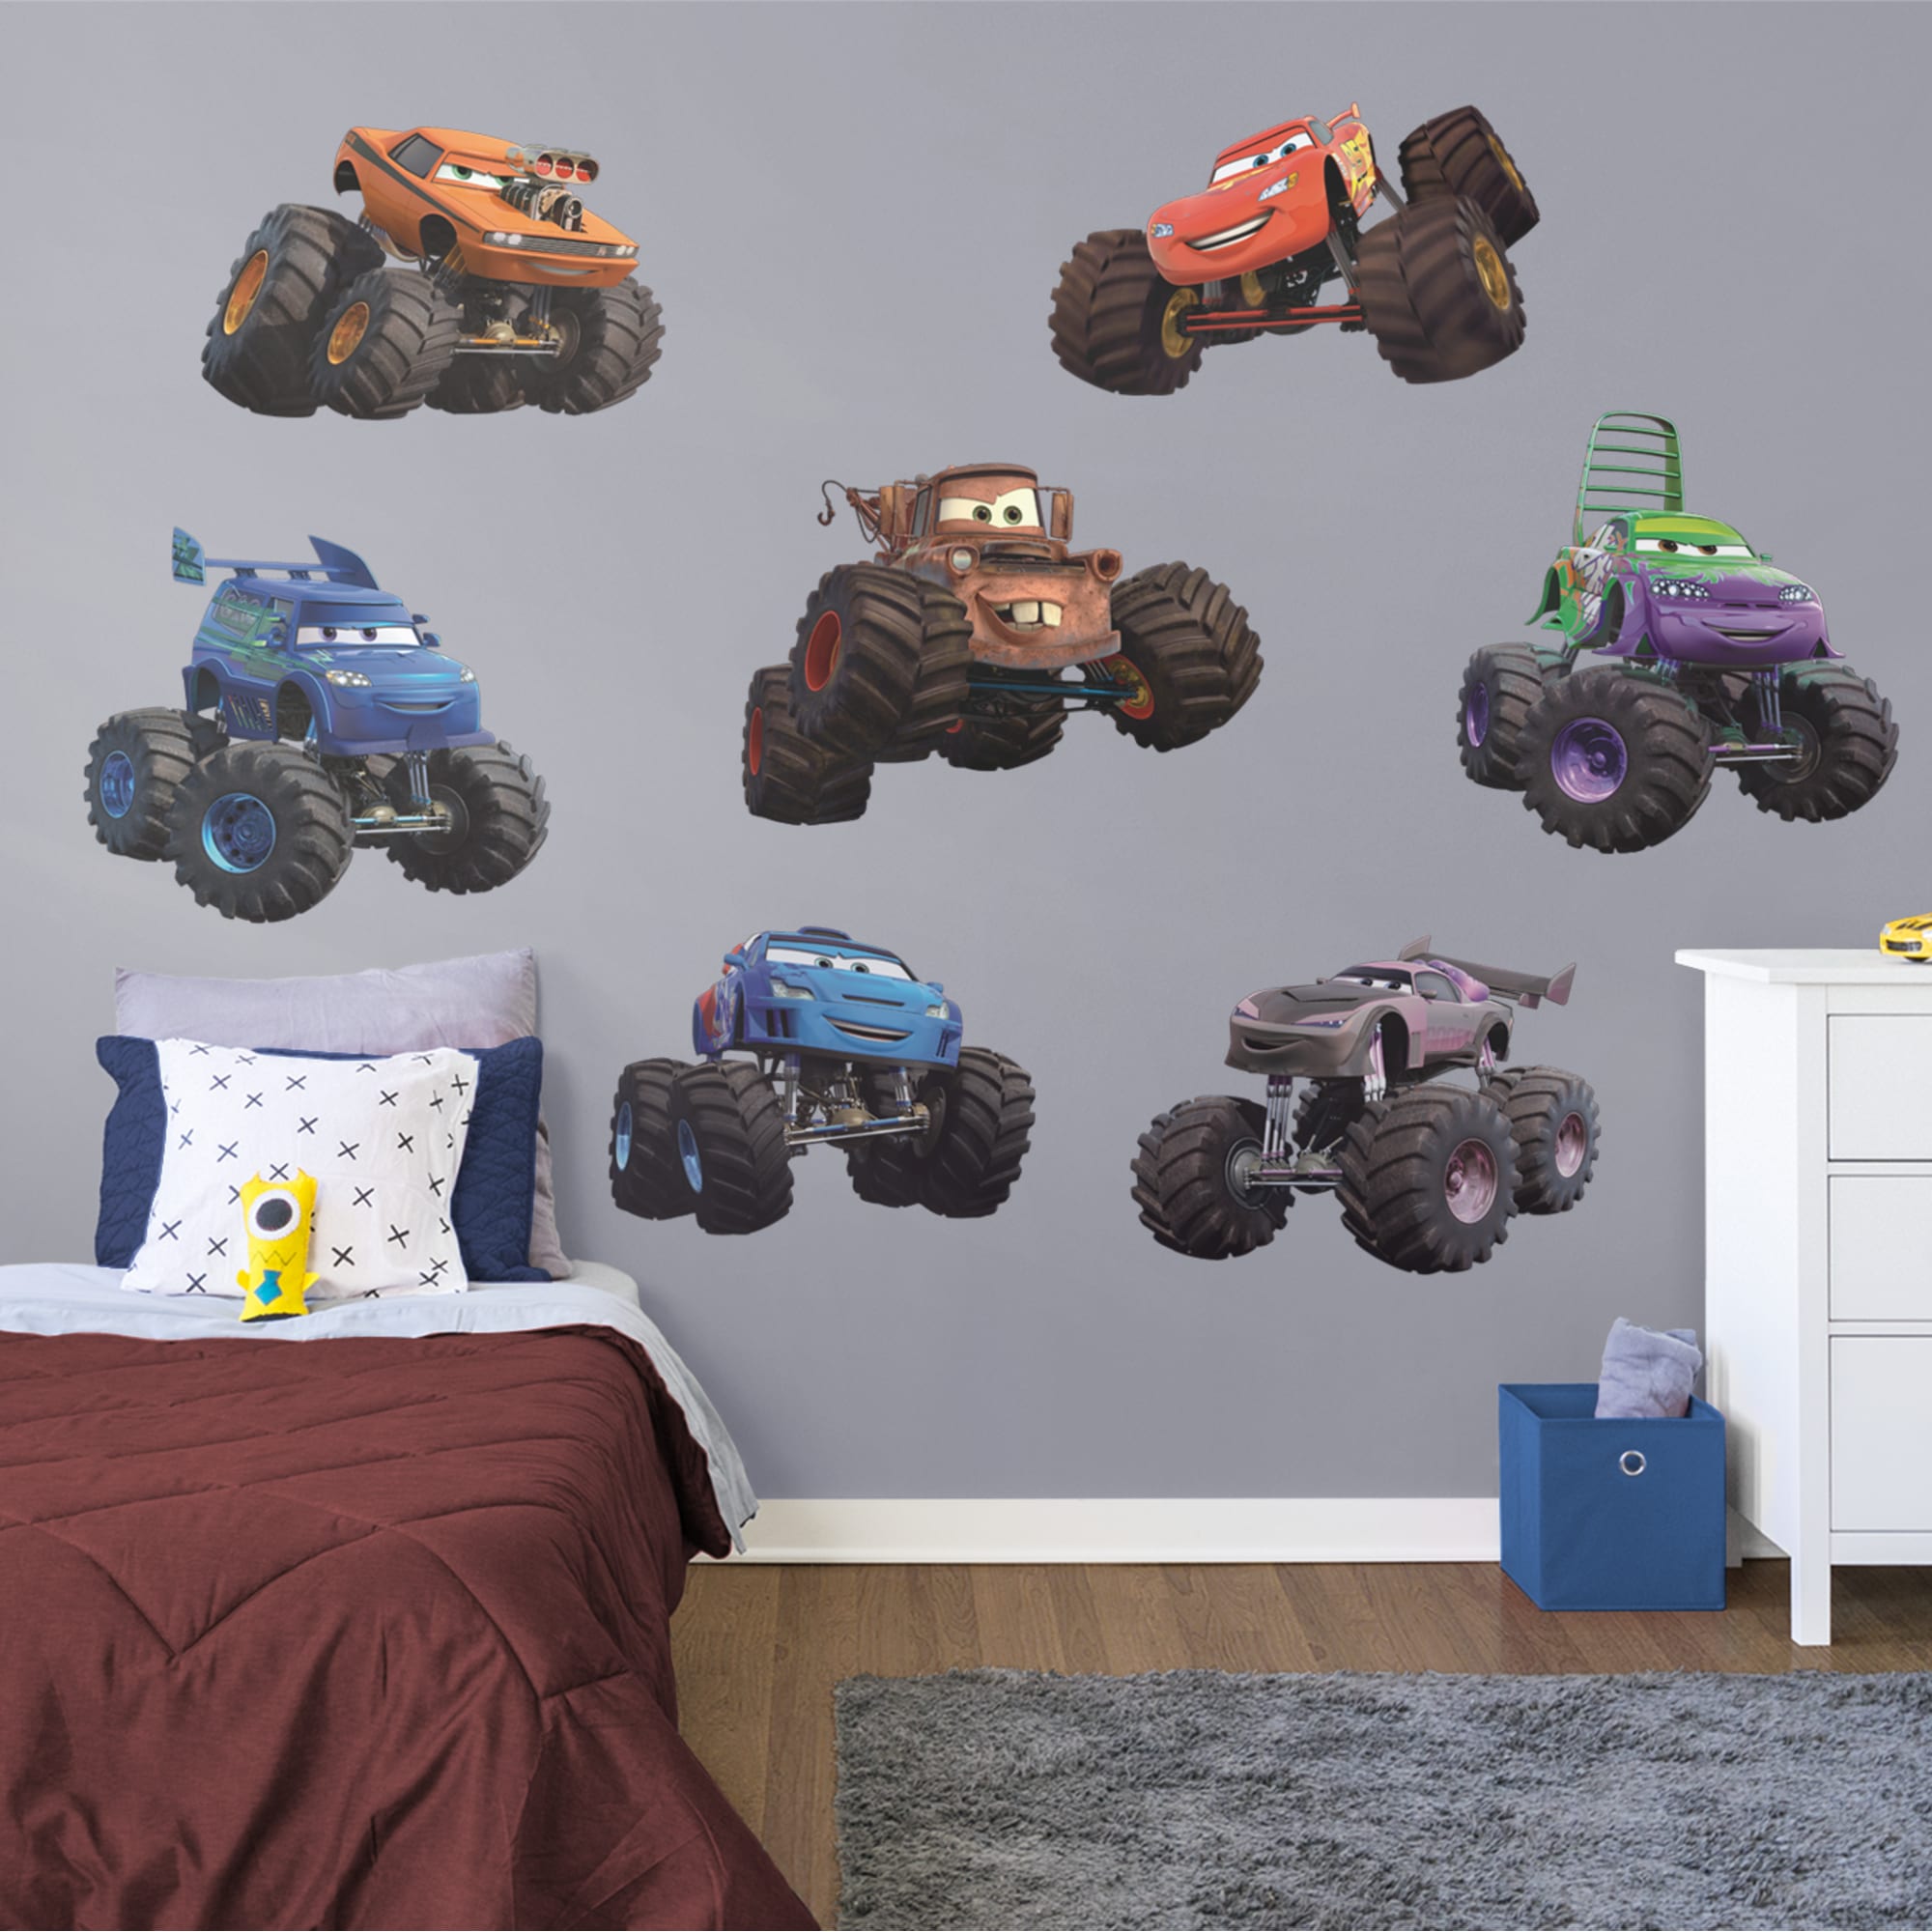 Cars: Monster Trucks Collection - Officially Licensed Disney/PIXAR Removable Wall Decals 79.0"W x 52.0"H by Fathead | Vinyl